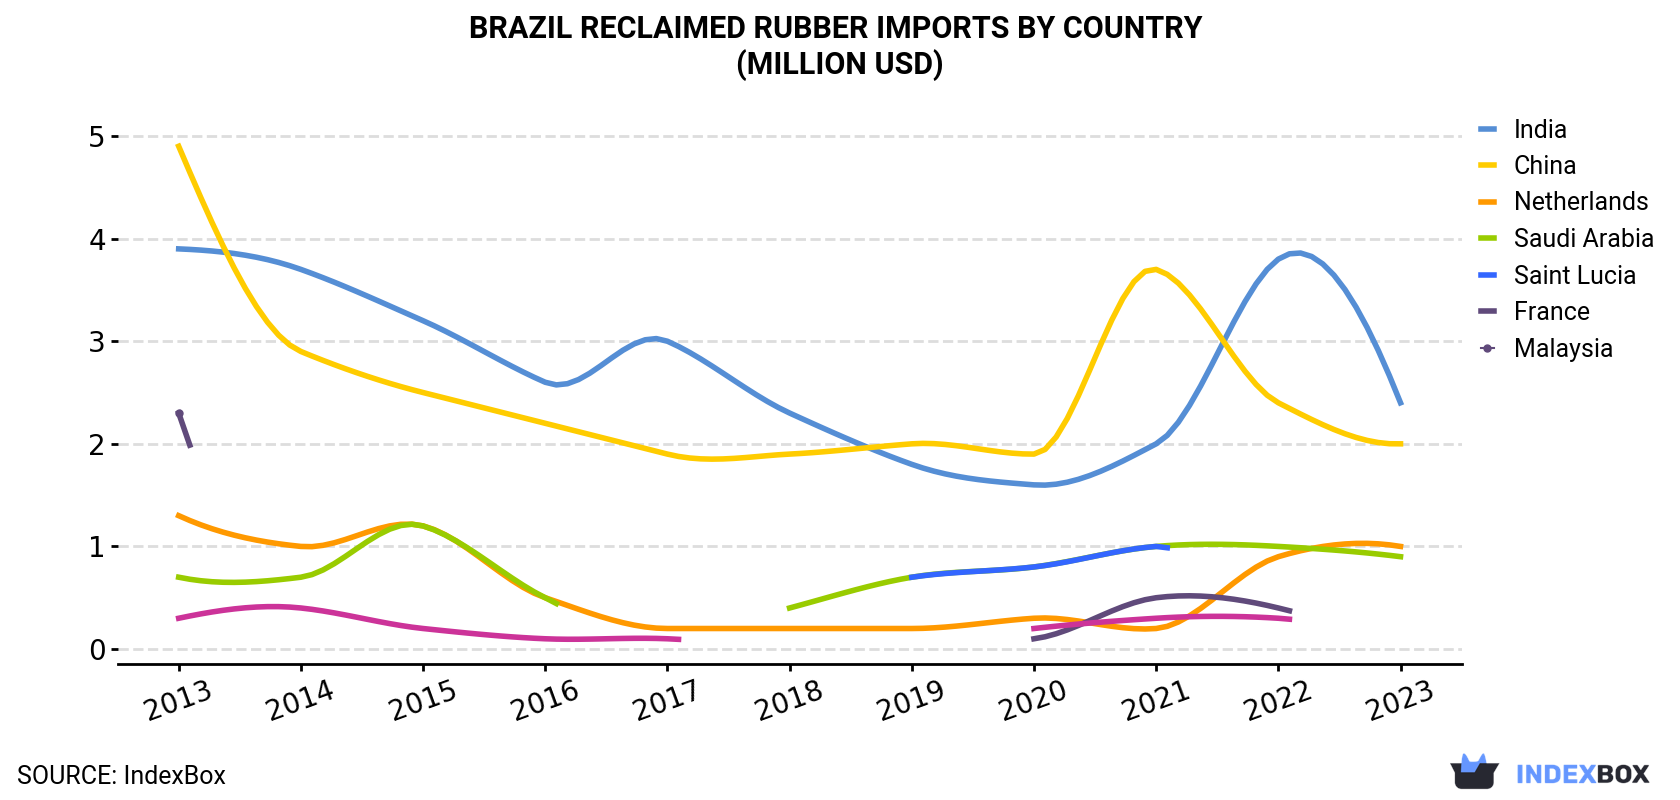 Brazil Reclaimed Rubber Imports By Country (Million USD)